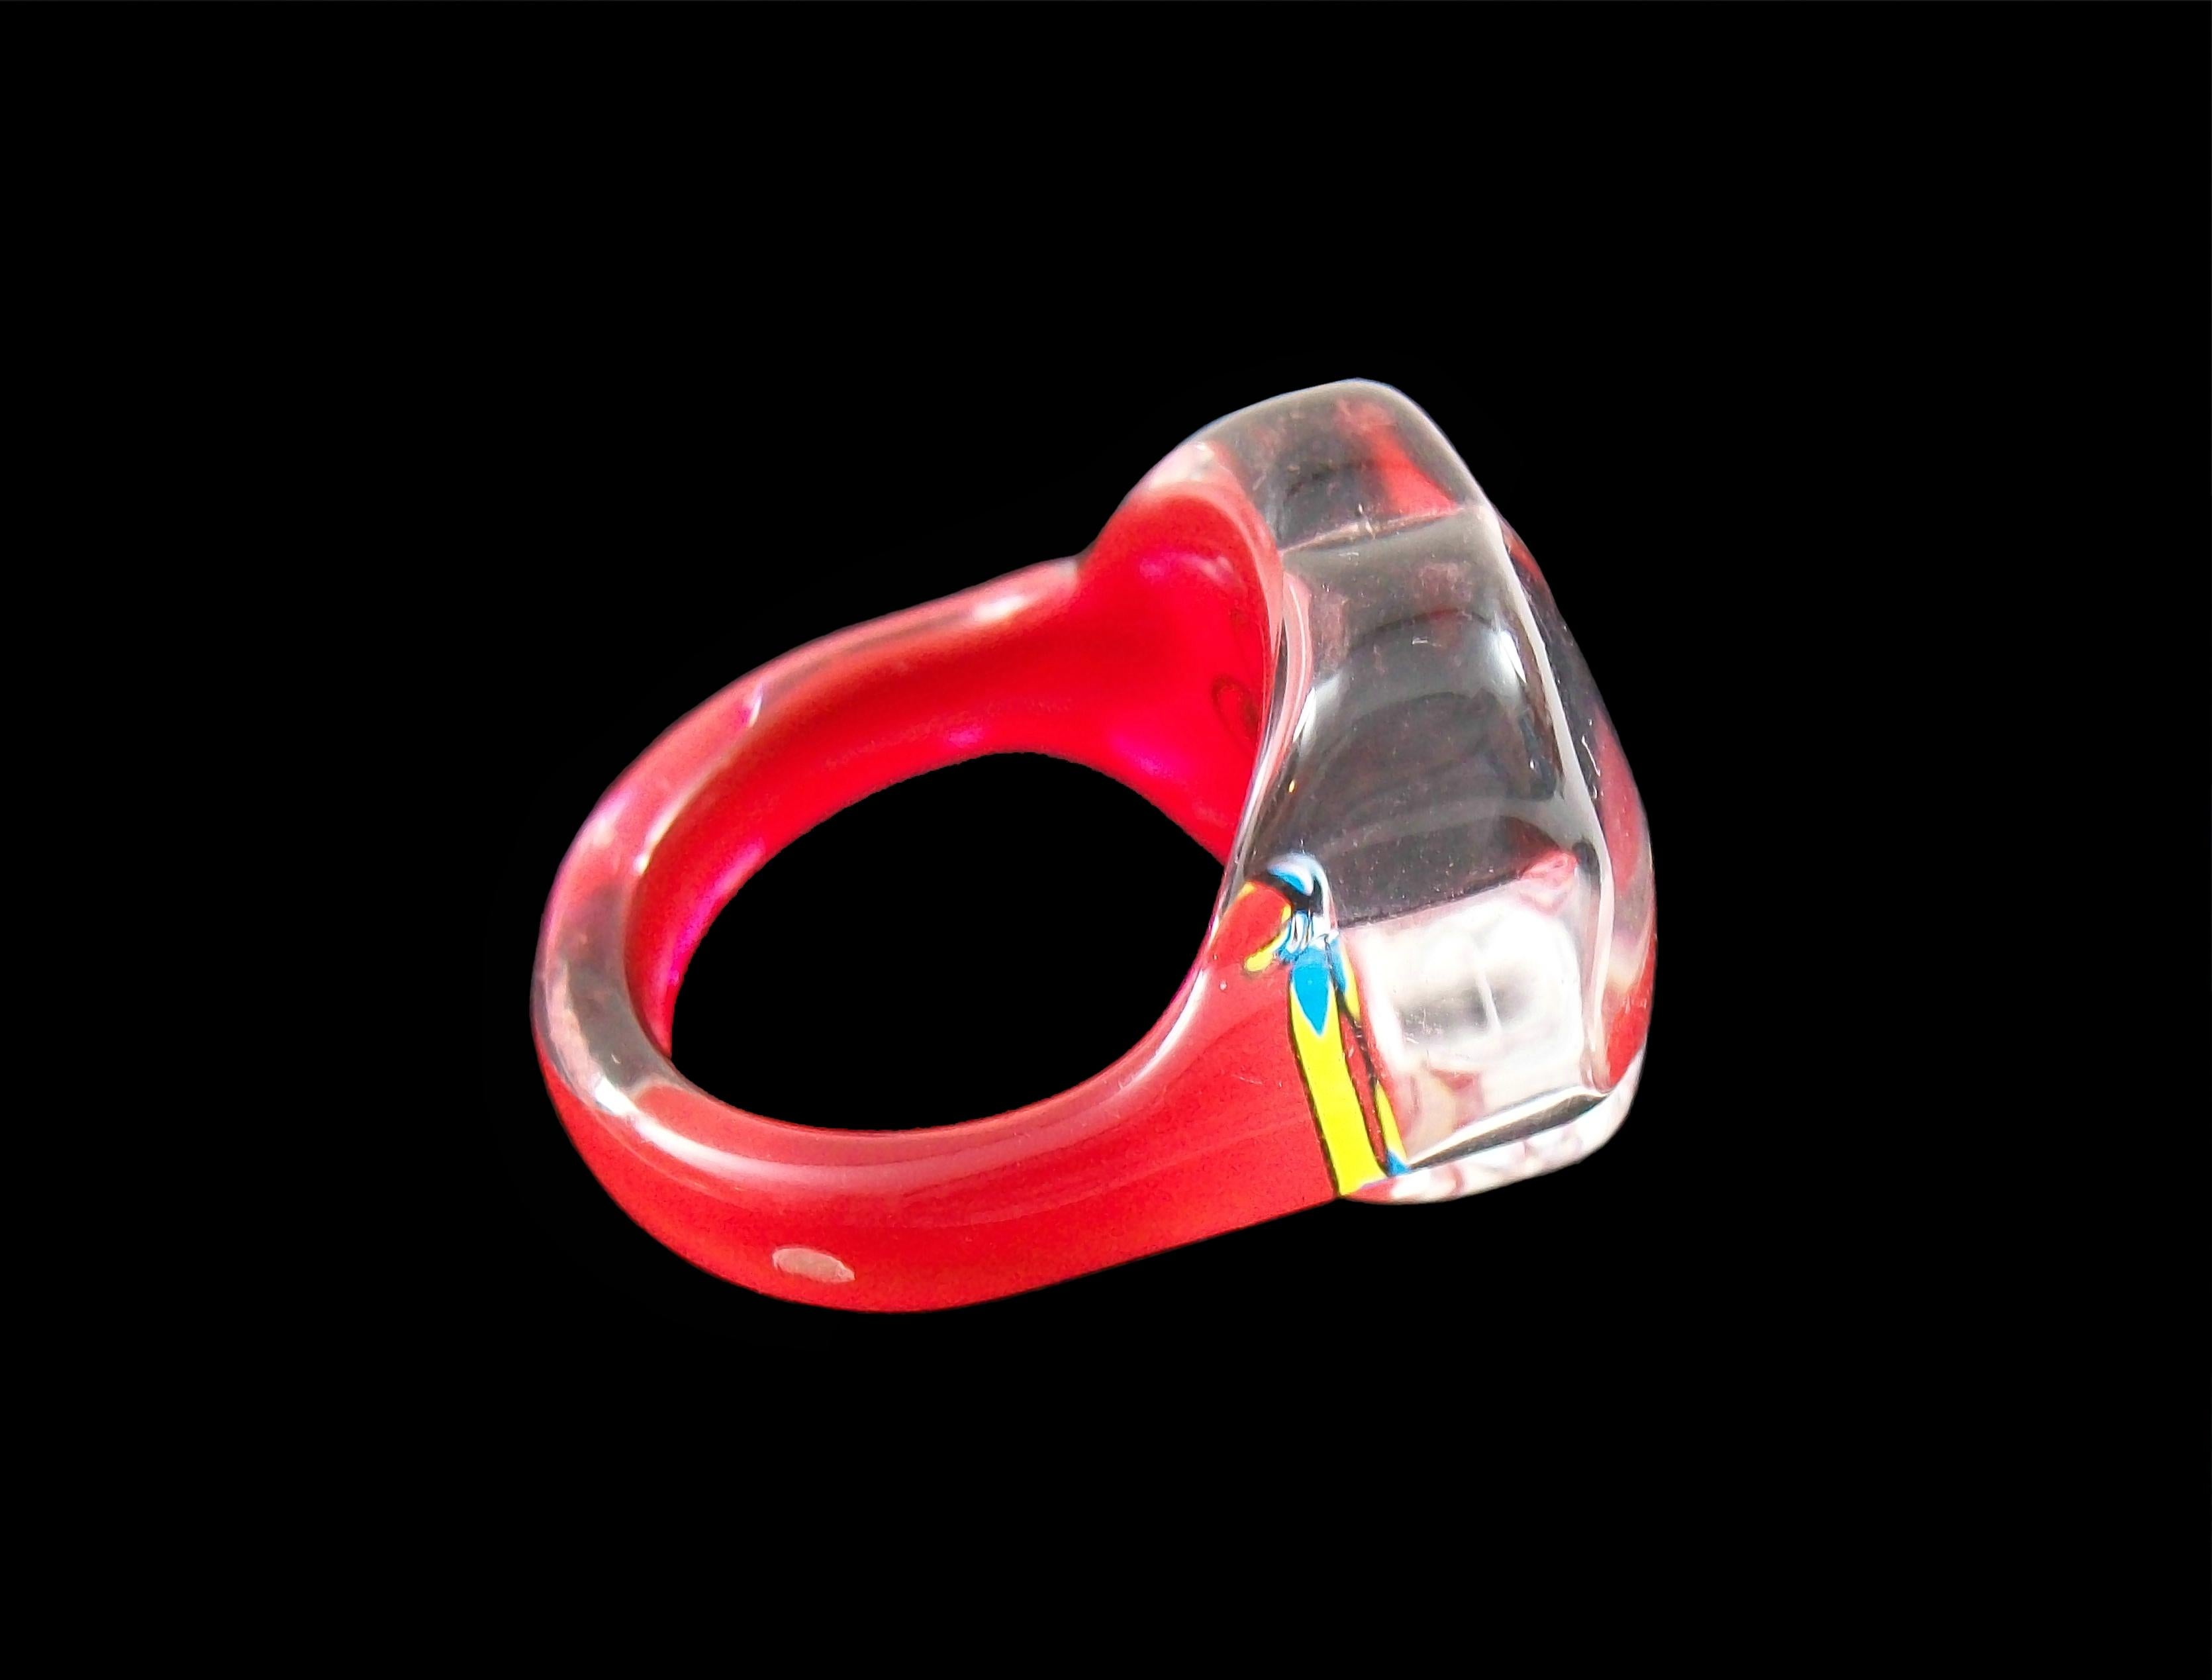 Women's or Men's Vintage Pop Art Back Painted Lucite Ring - Size 7 3/4 - Unsigned - Late 20th C. For Sale